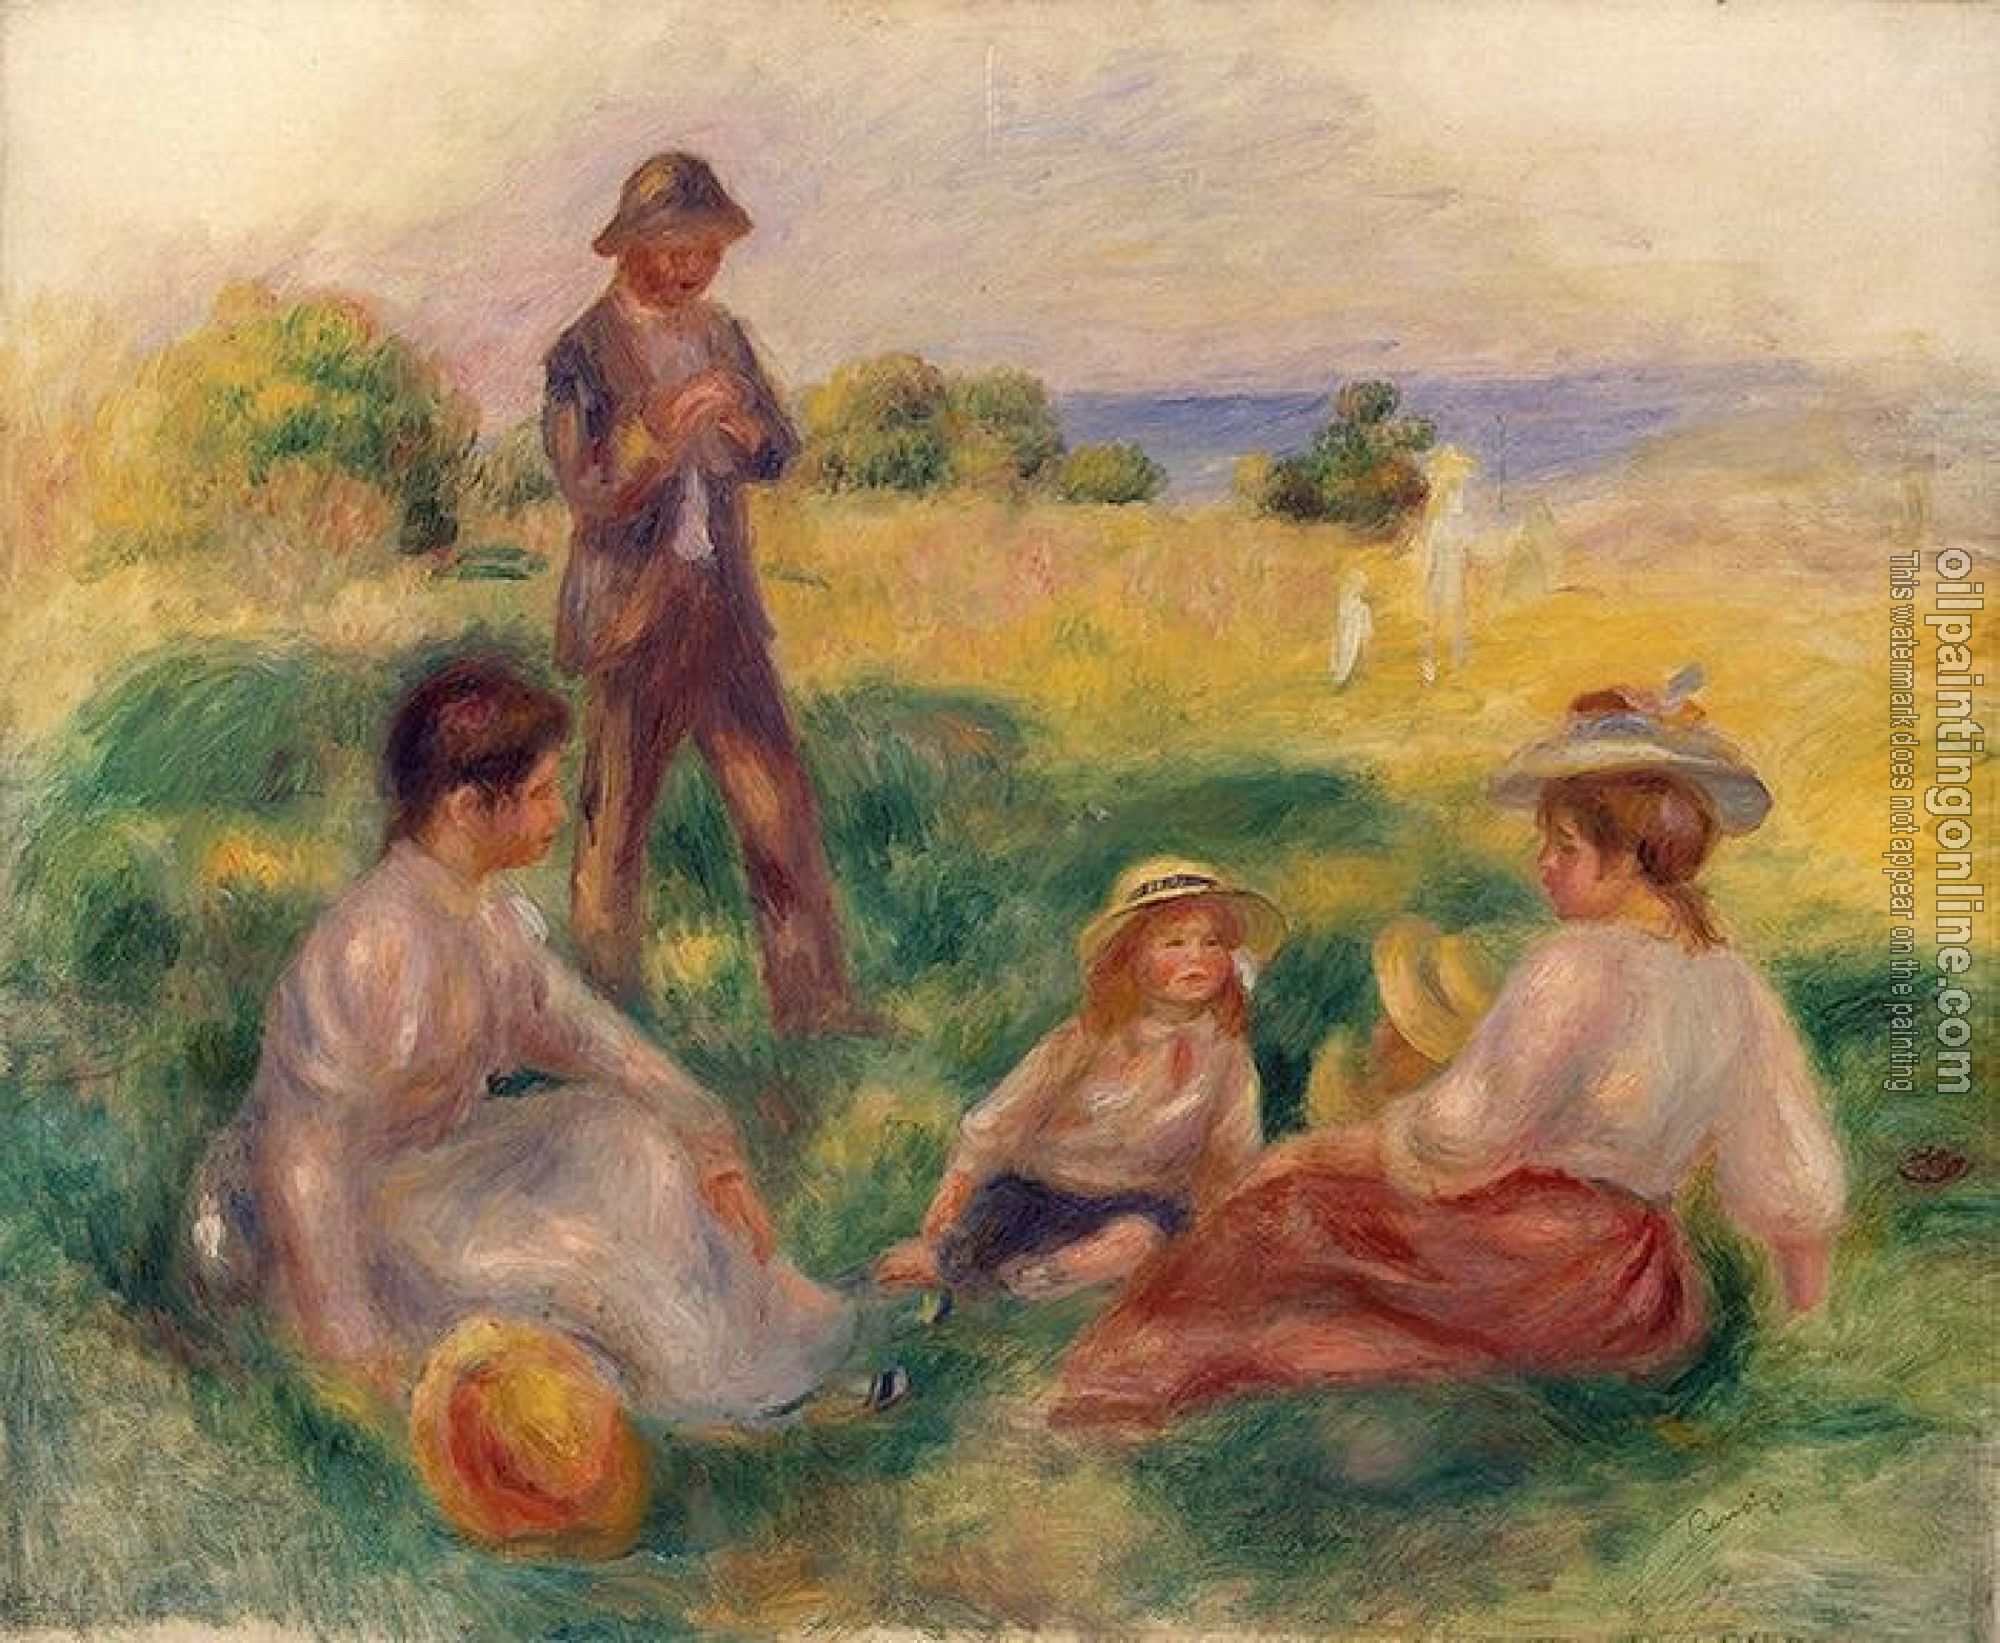 Renoir, Pierre Auguste - Party in the Country at Berneval